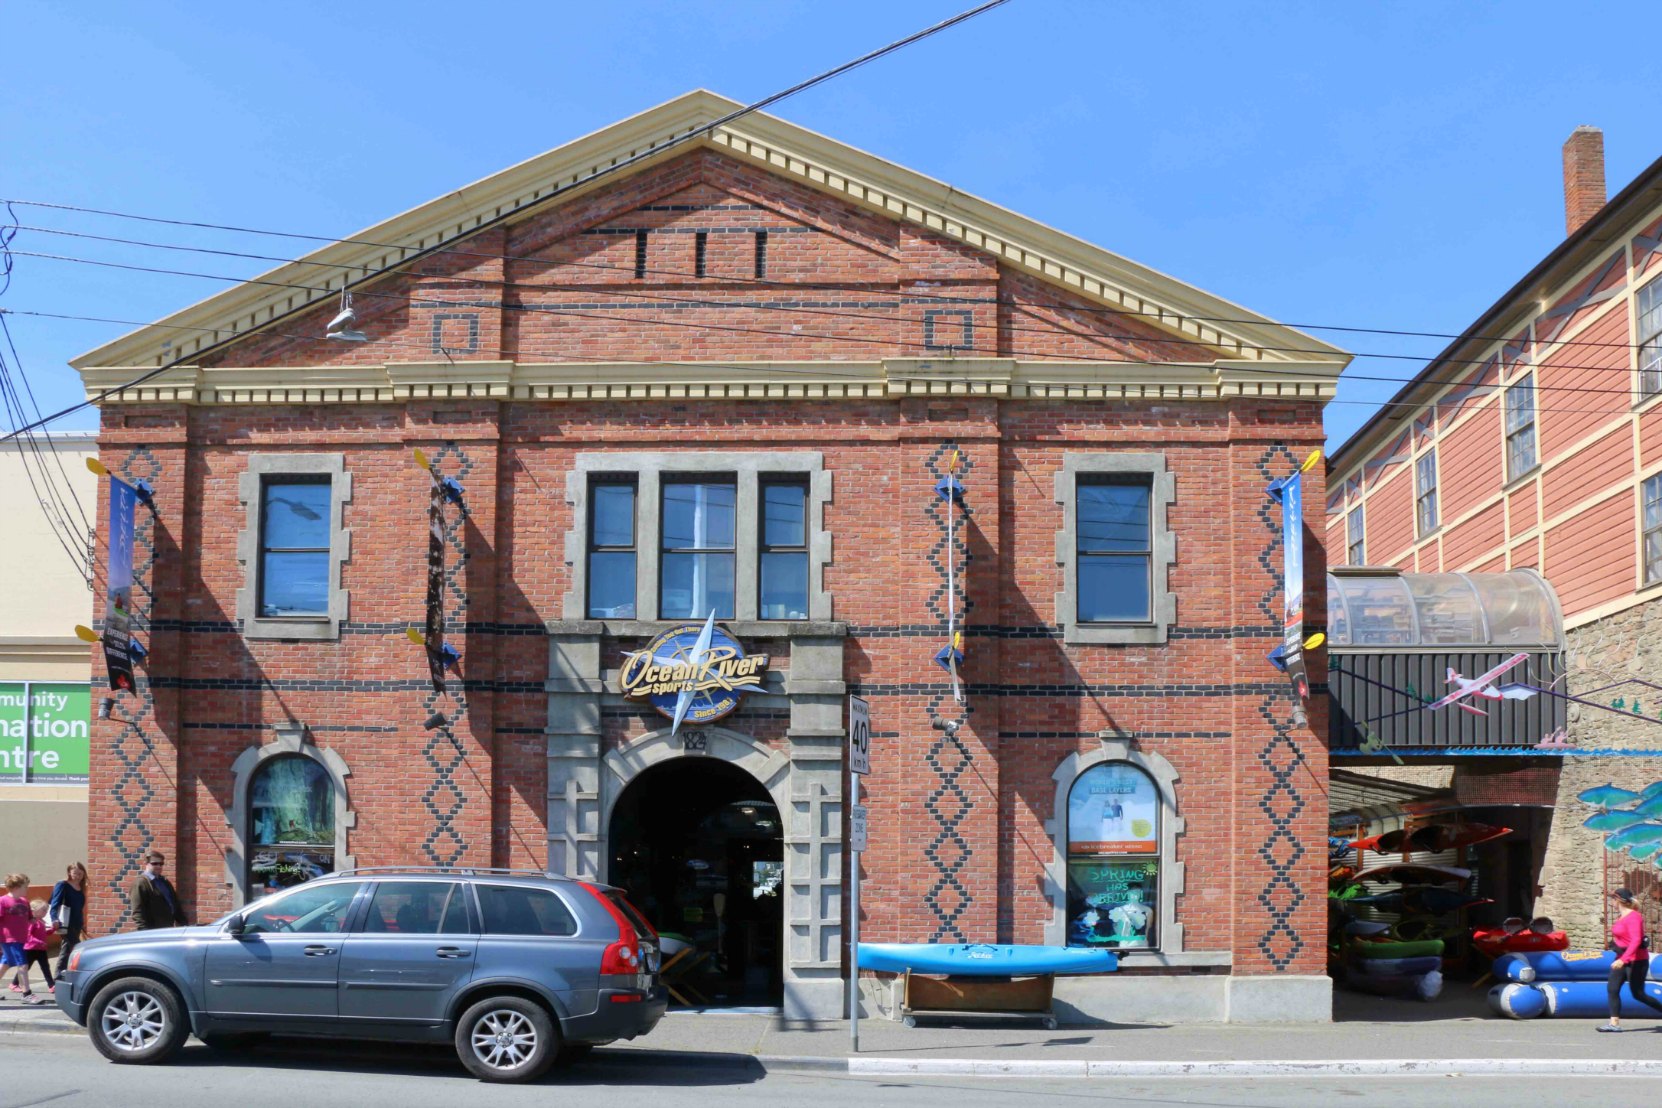 Ocean River Sports, 1824 Store Street. This building was originally built in 1890 for the Victoria Rice and Flouring Mill.